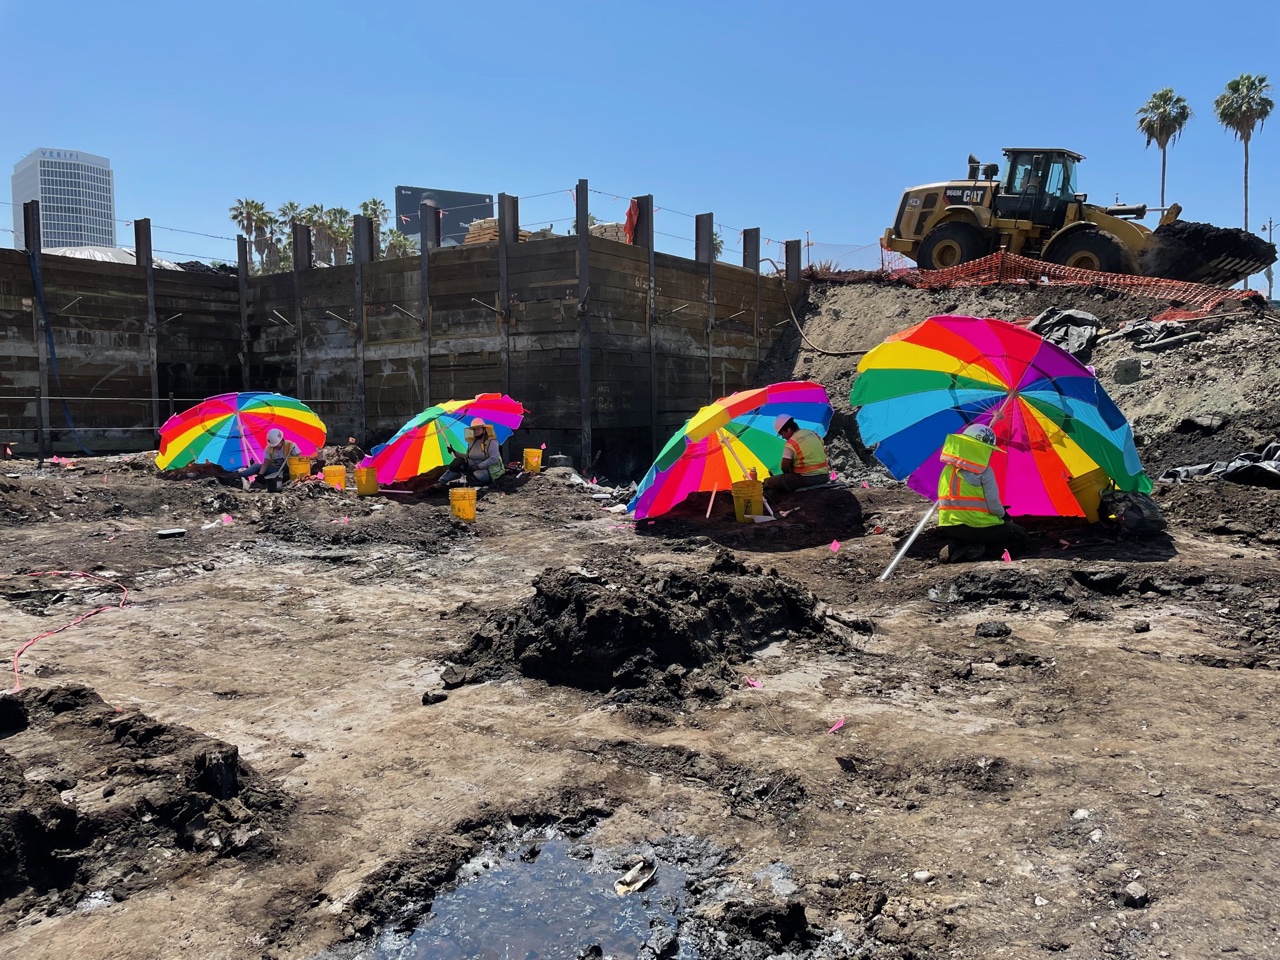 View of construction site with colorful umbrellas